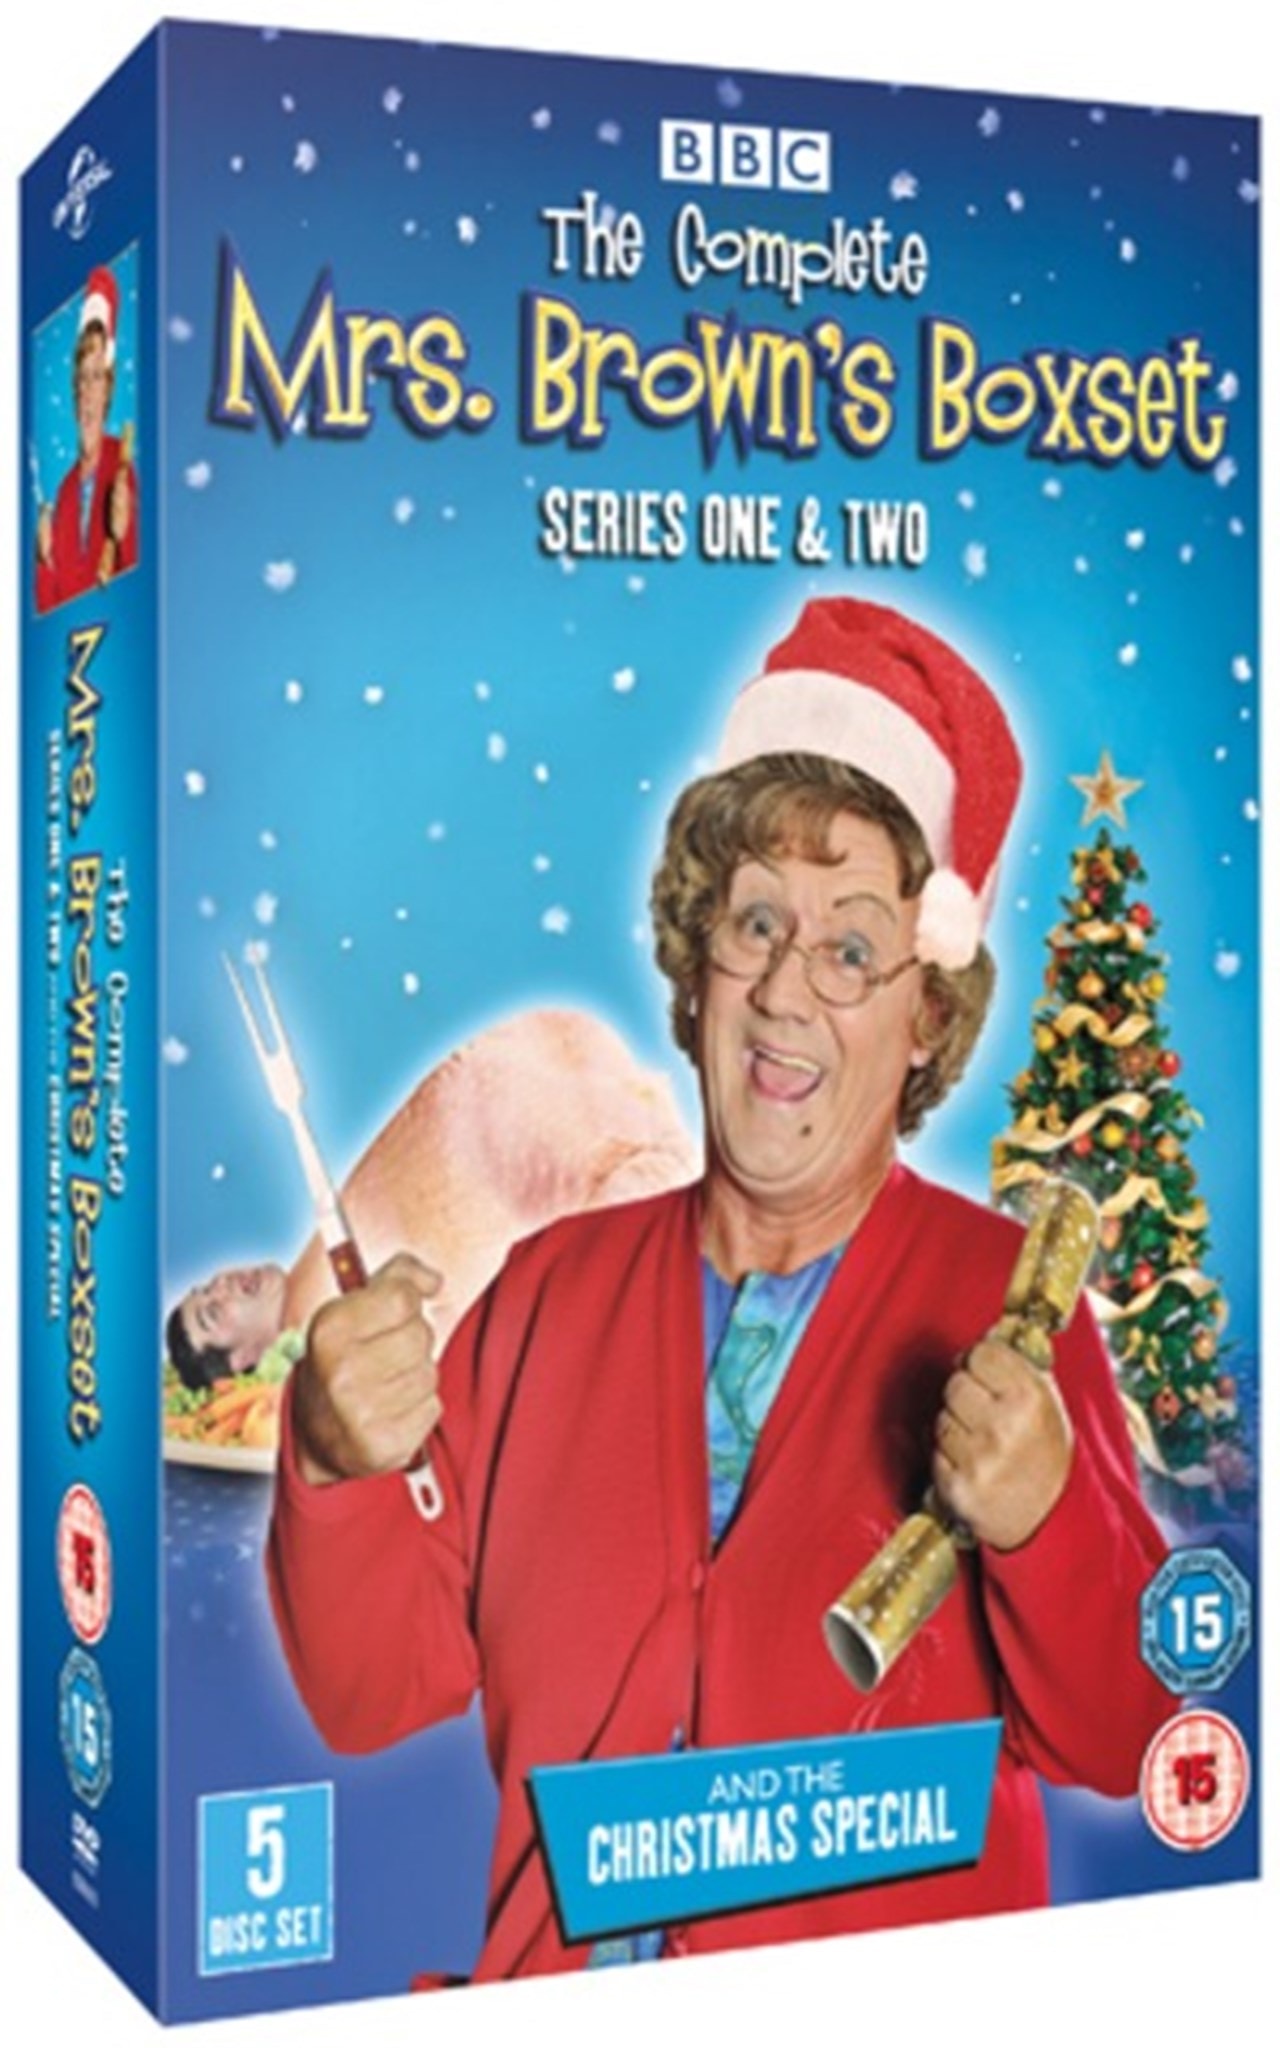 Mrs Brown's Boys Complete Series 1 and 2/Christmas Special DVD Box